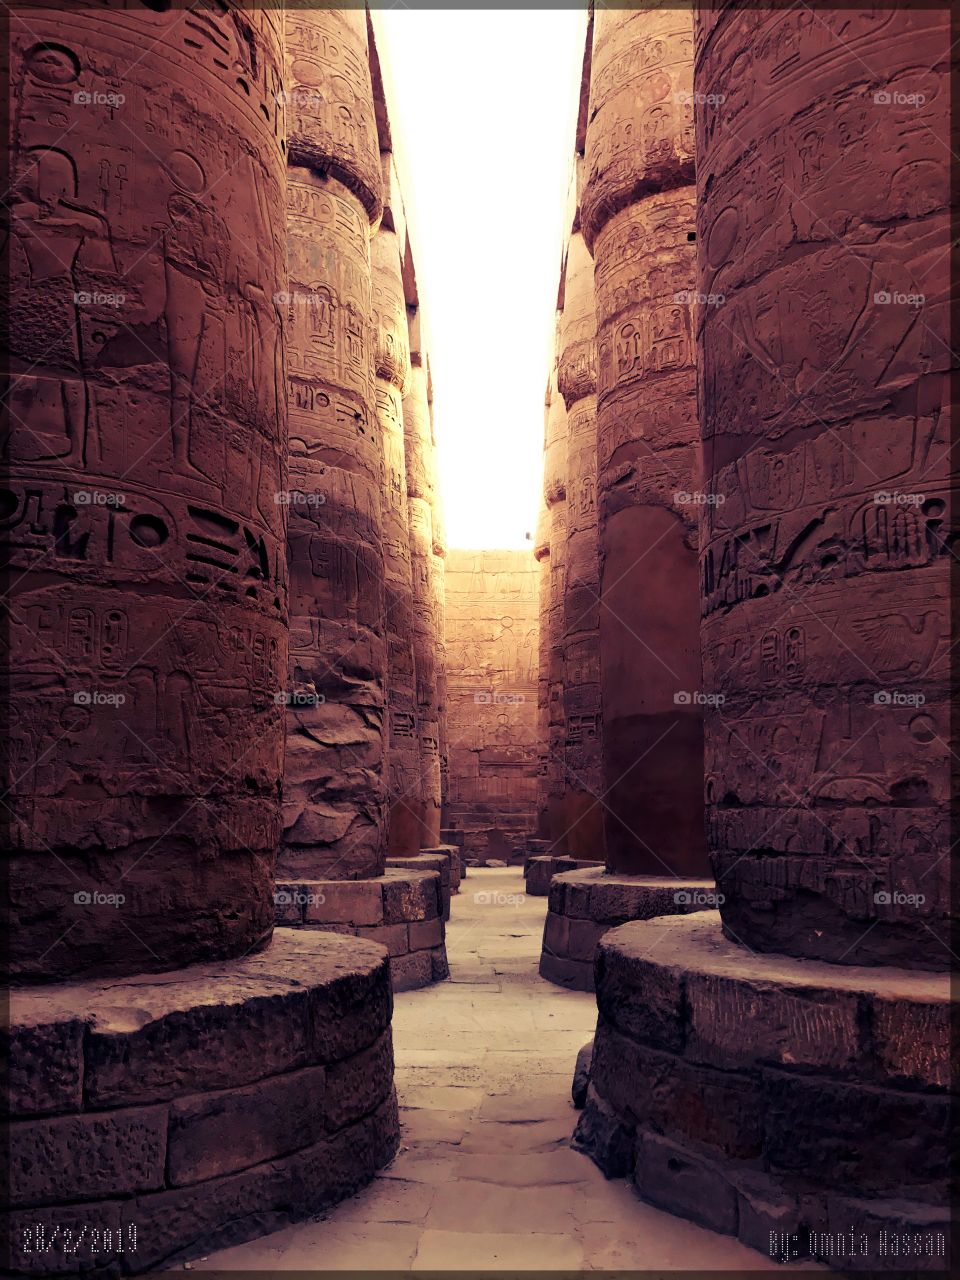 Sunrays through the ancient Karnak temple columns reflecting the ancient Egyptian pharaonic life into our modern life...my ancestors ❤️